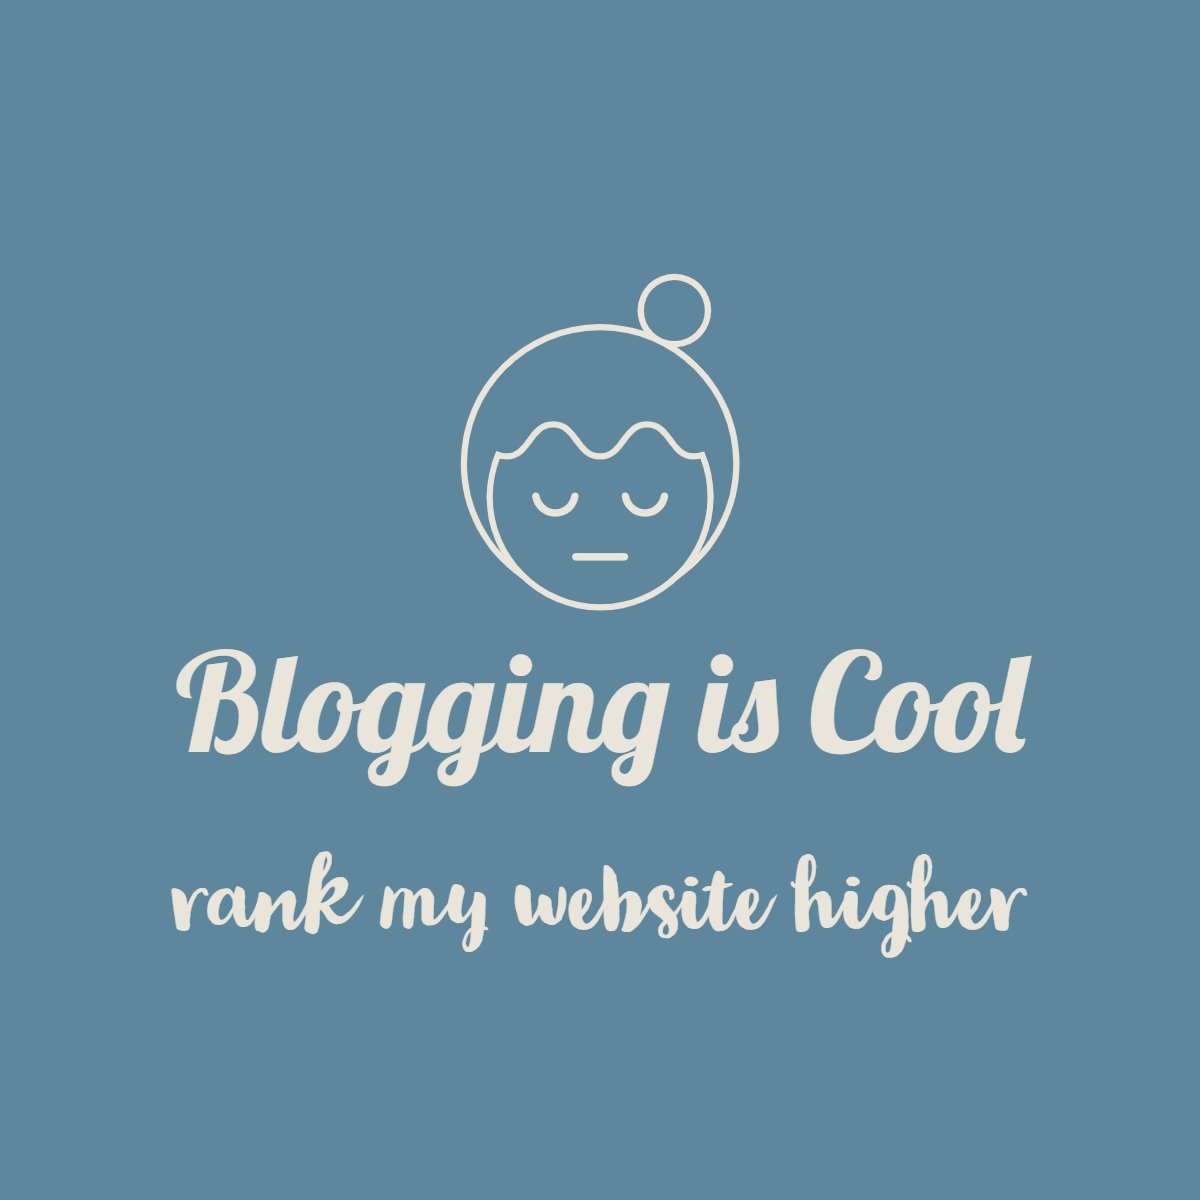 Bloggingiscool.com Why some of your content might not be indexed